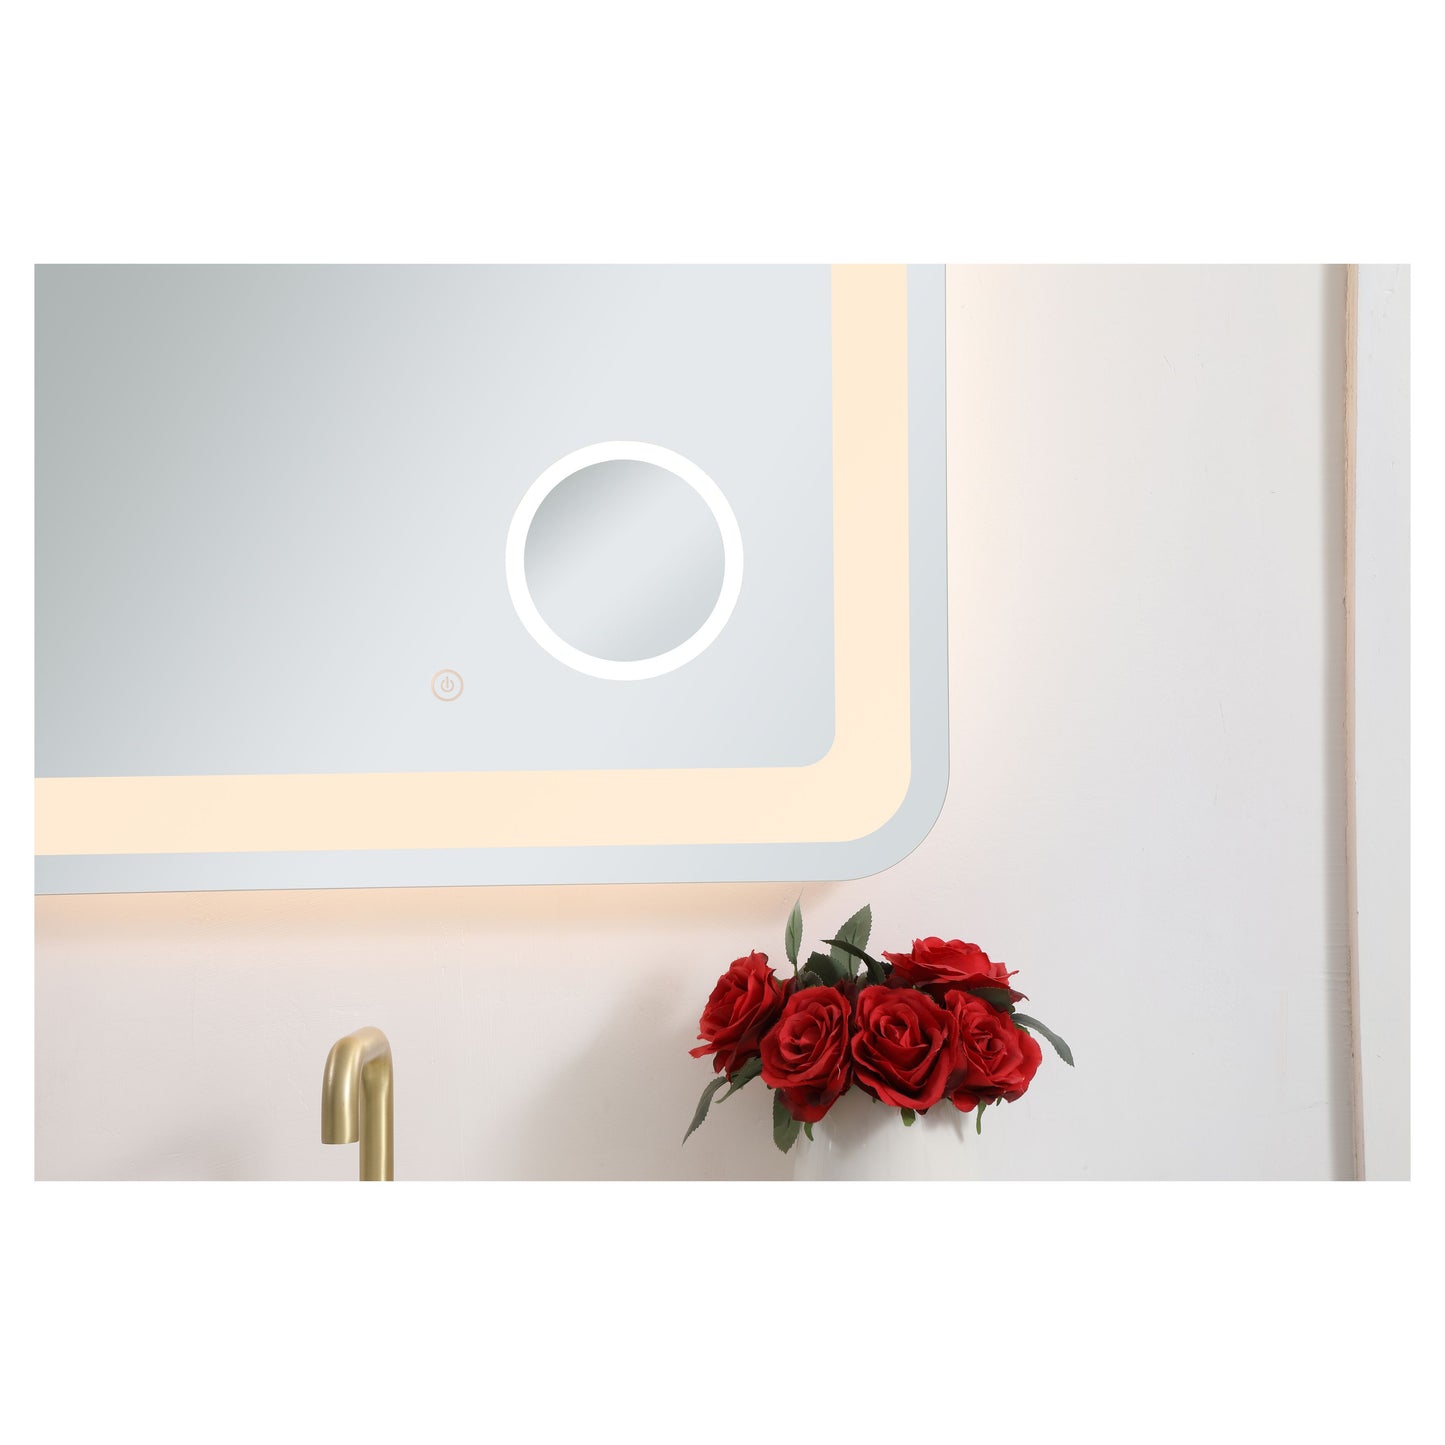 MRE52730 Lux 30" x 27" LED Mirror in Glossy White - Adjustable Color Temp